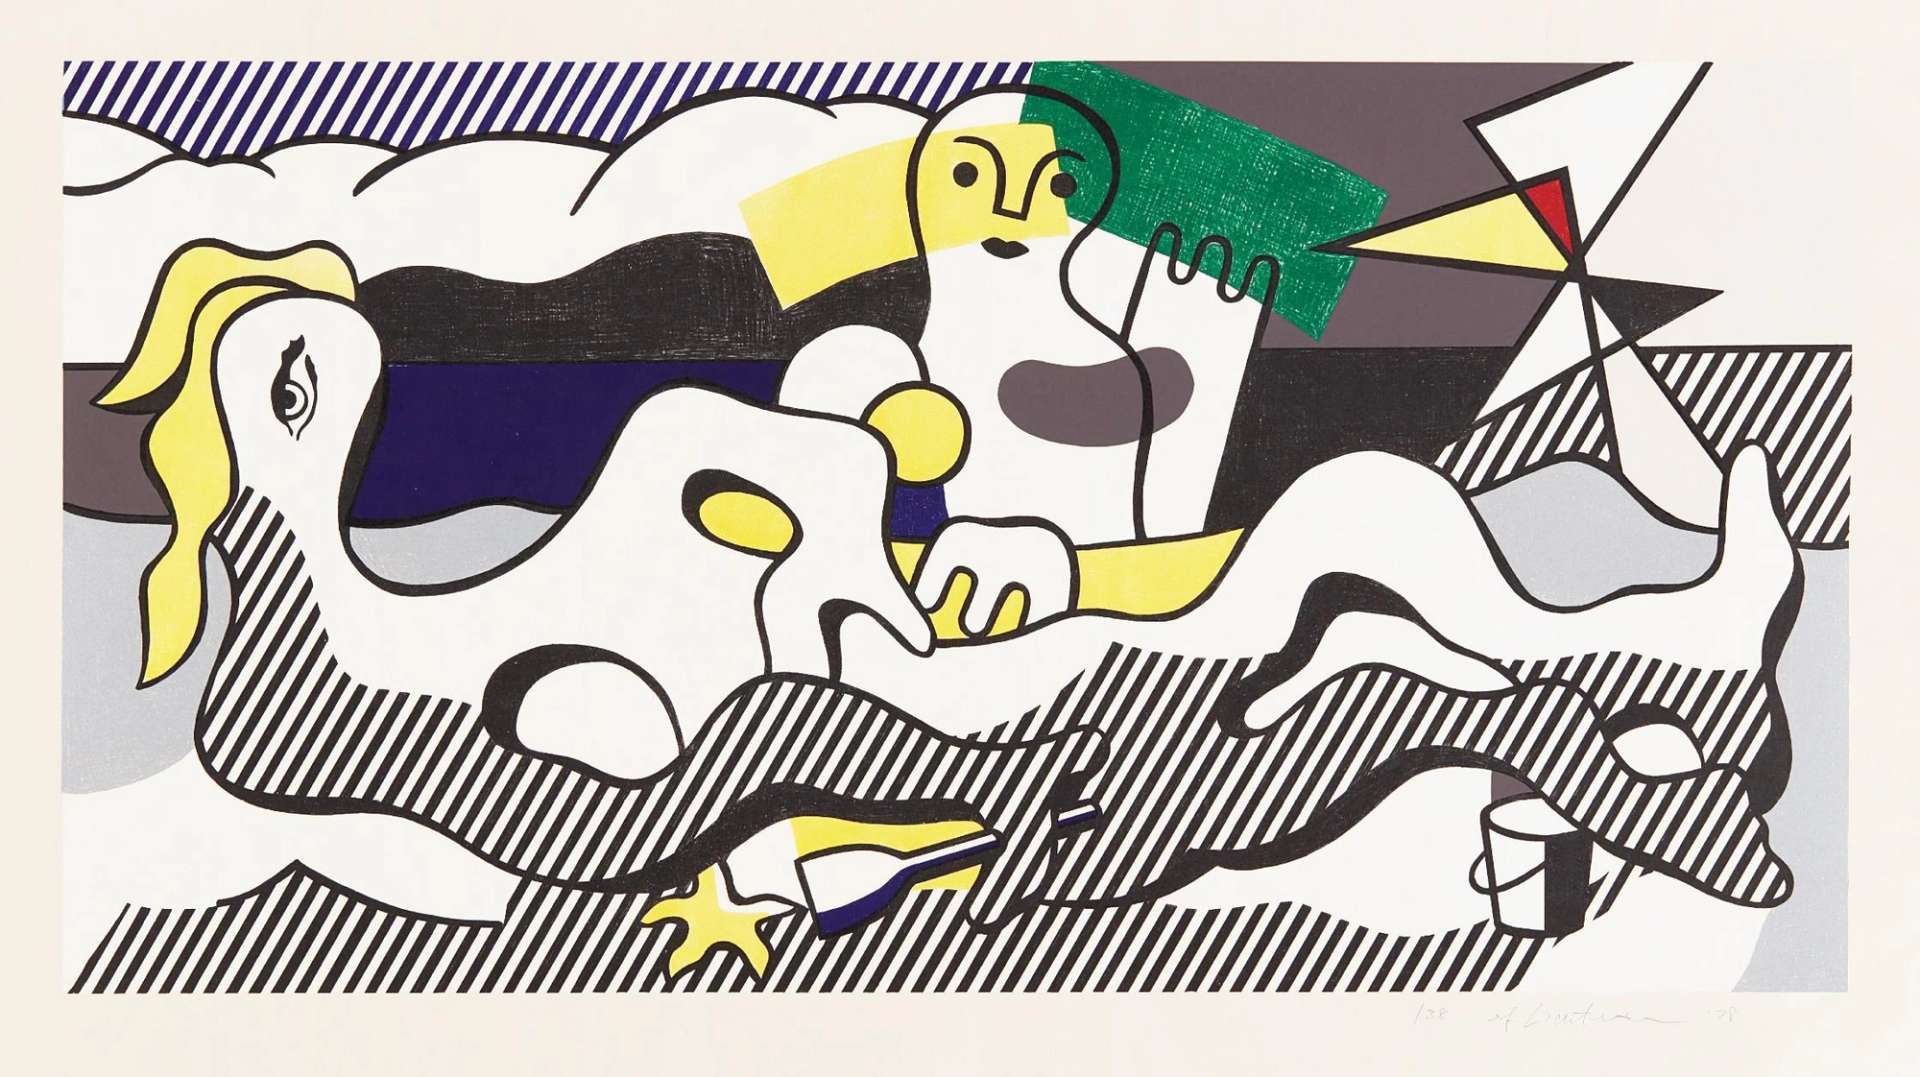 Roy Lichtenstein’s At The Beach. A Pop Art, Surrealist lithograph of two figures sitting and reclining on sand at the beach. 